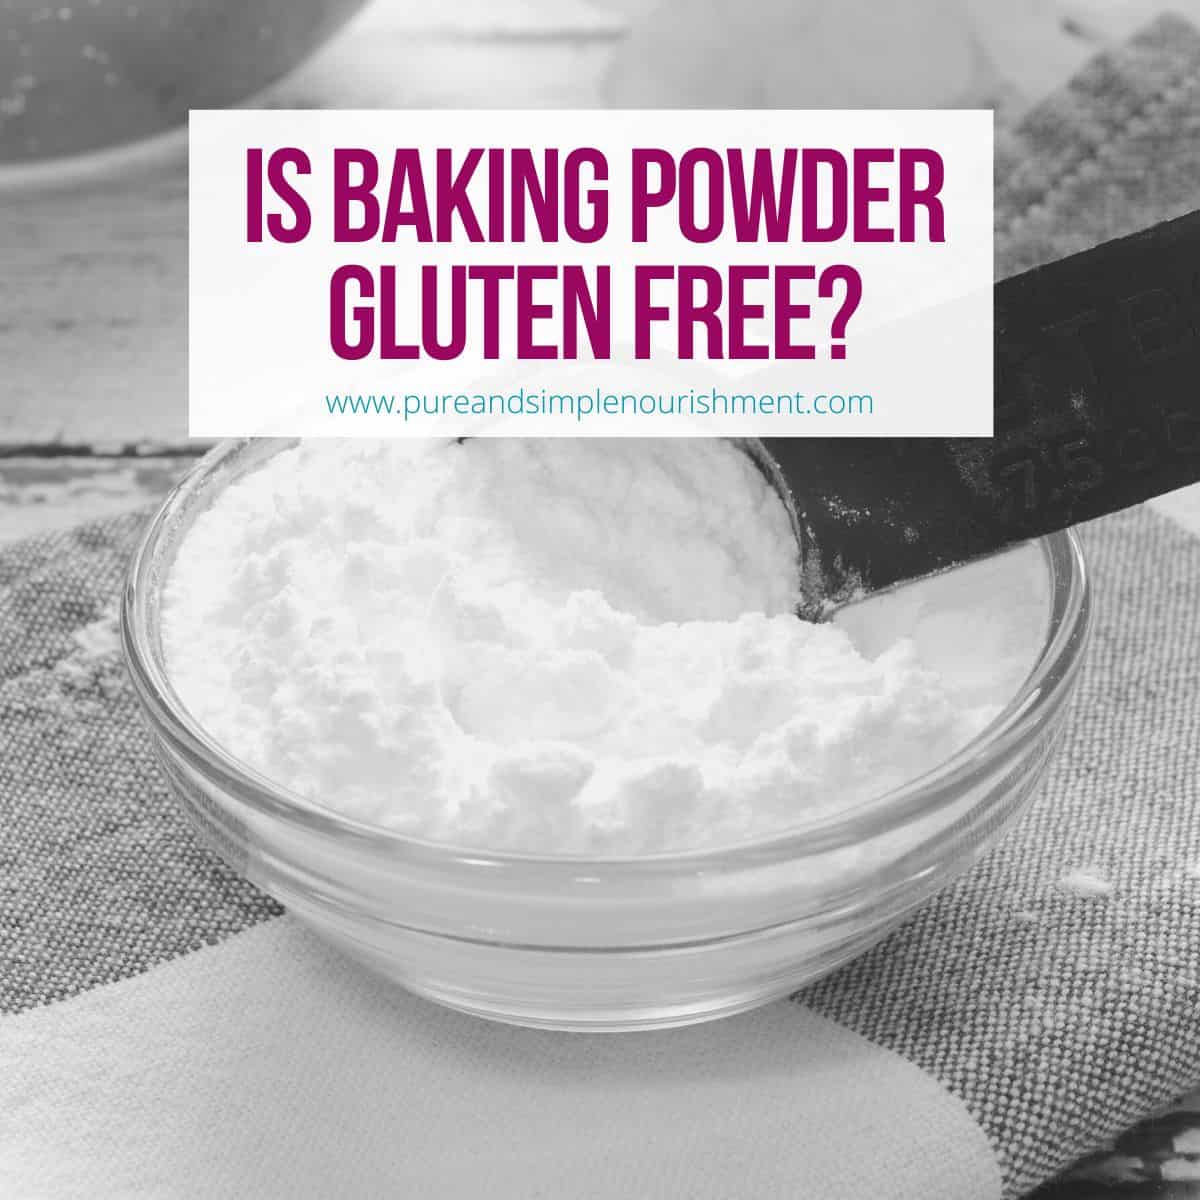 A glass bowl with baking powder and a teaspoon in it with the title Is Baking Powder Gluten Free over it.